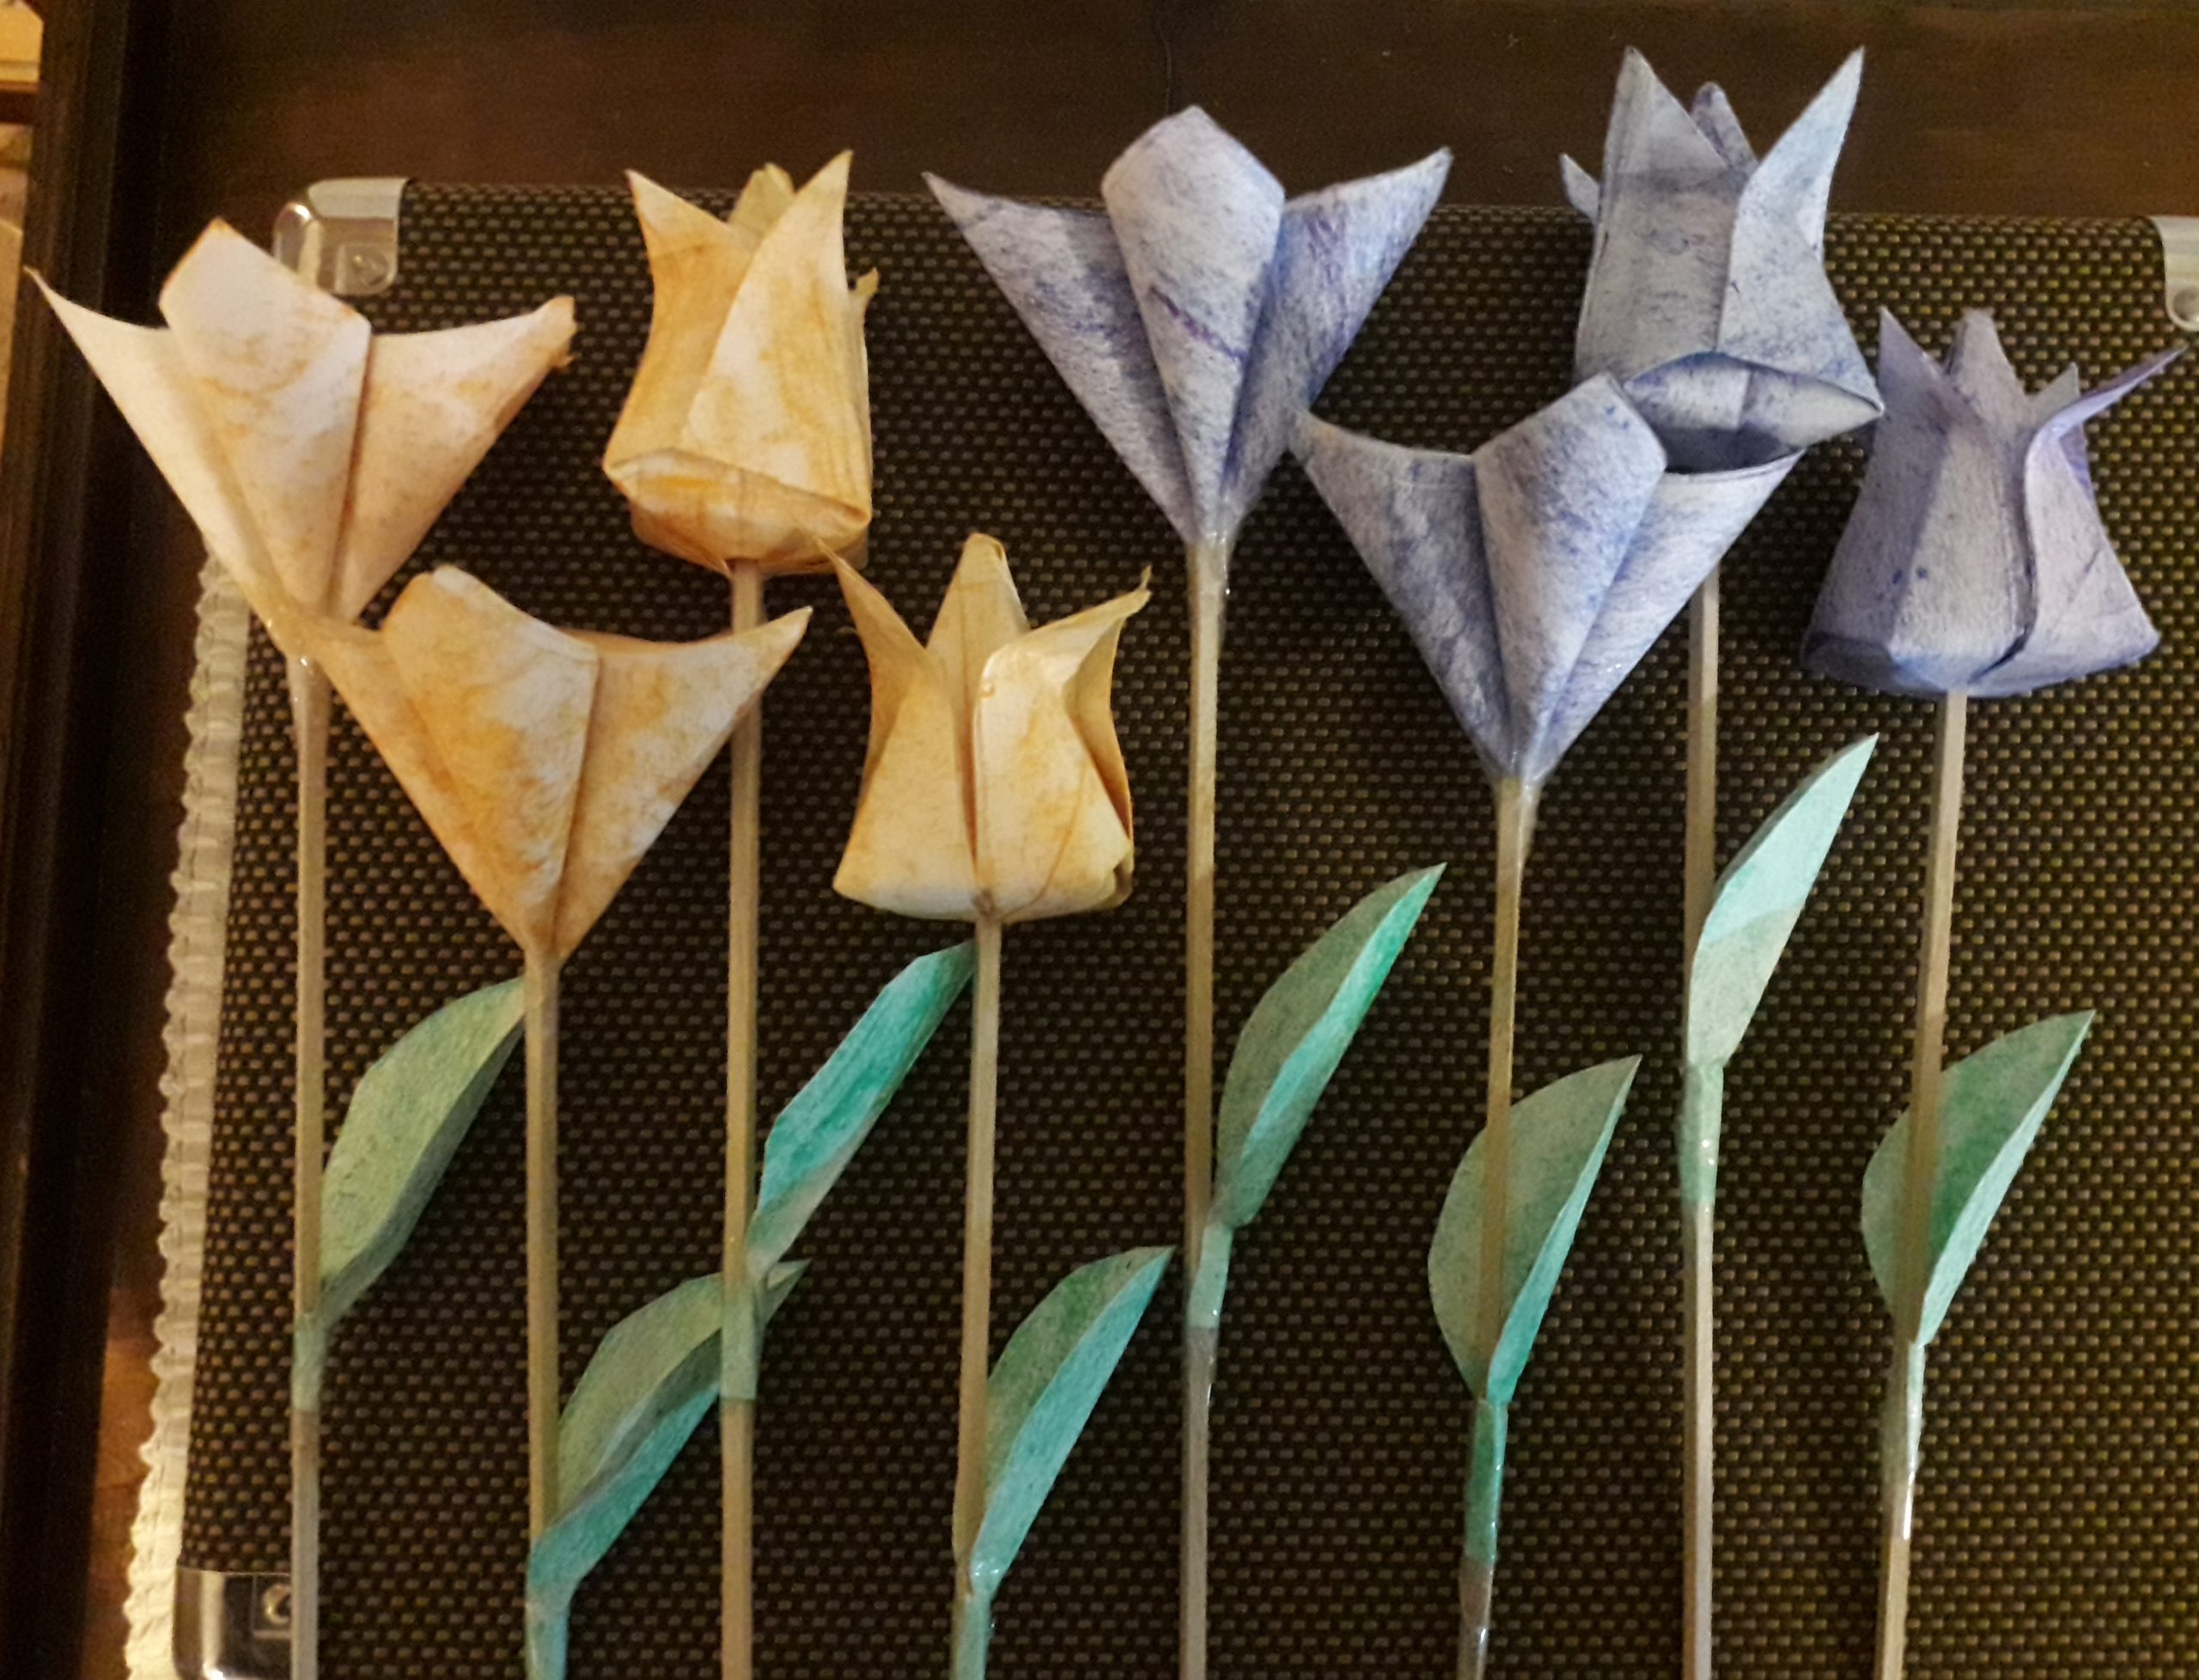 05 – Paperwork and origami, three dimensional expression